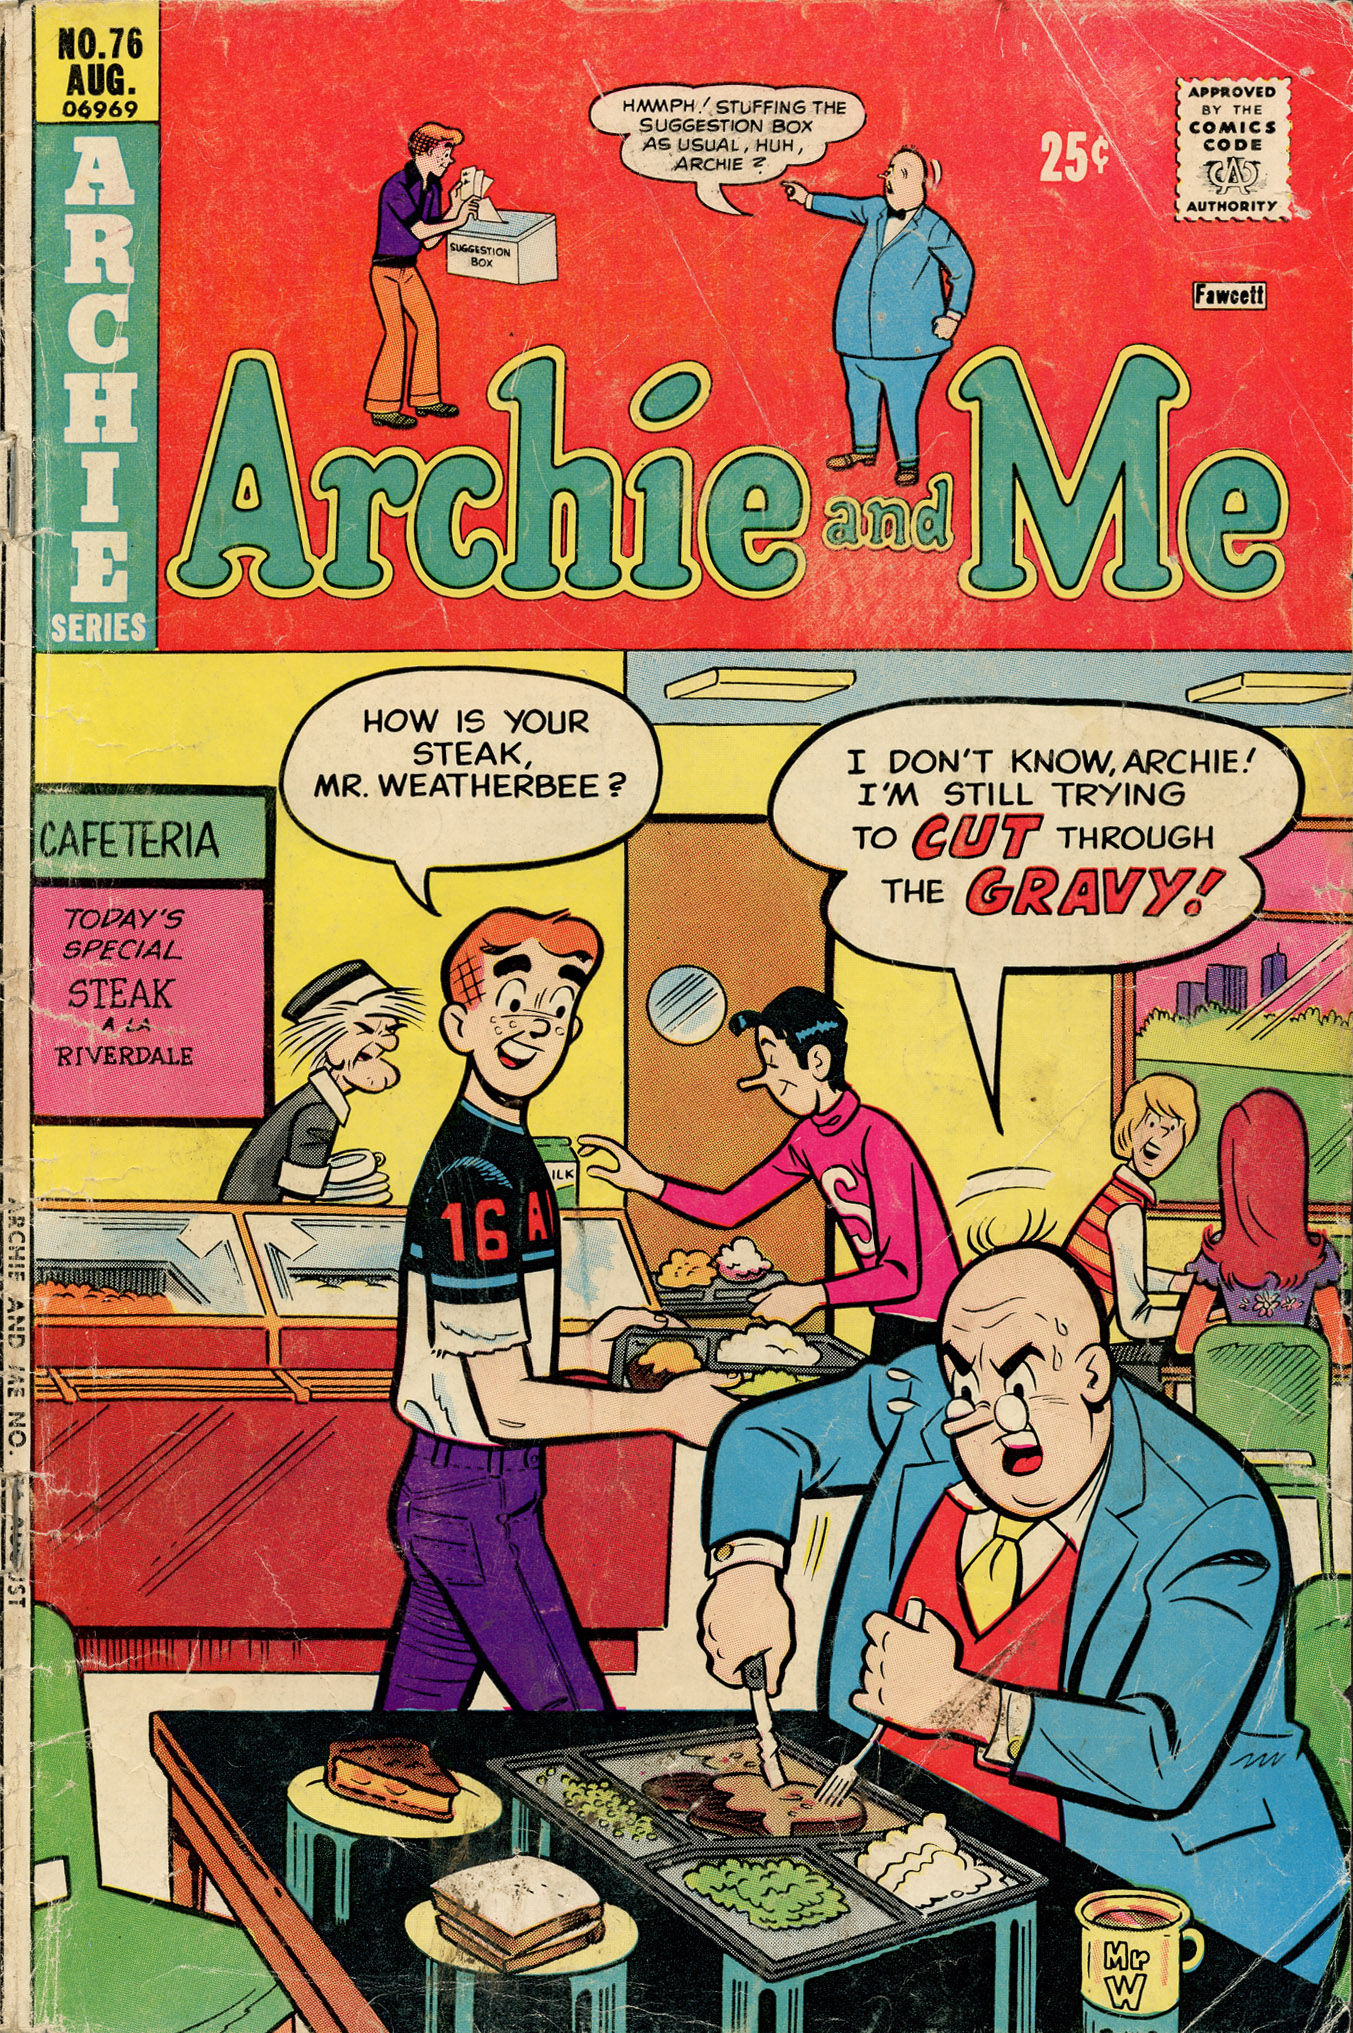 Read online Archie and Me comic -  Issue #76 - 1